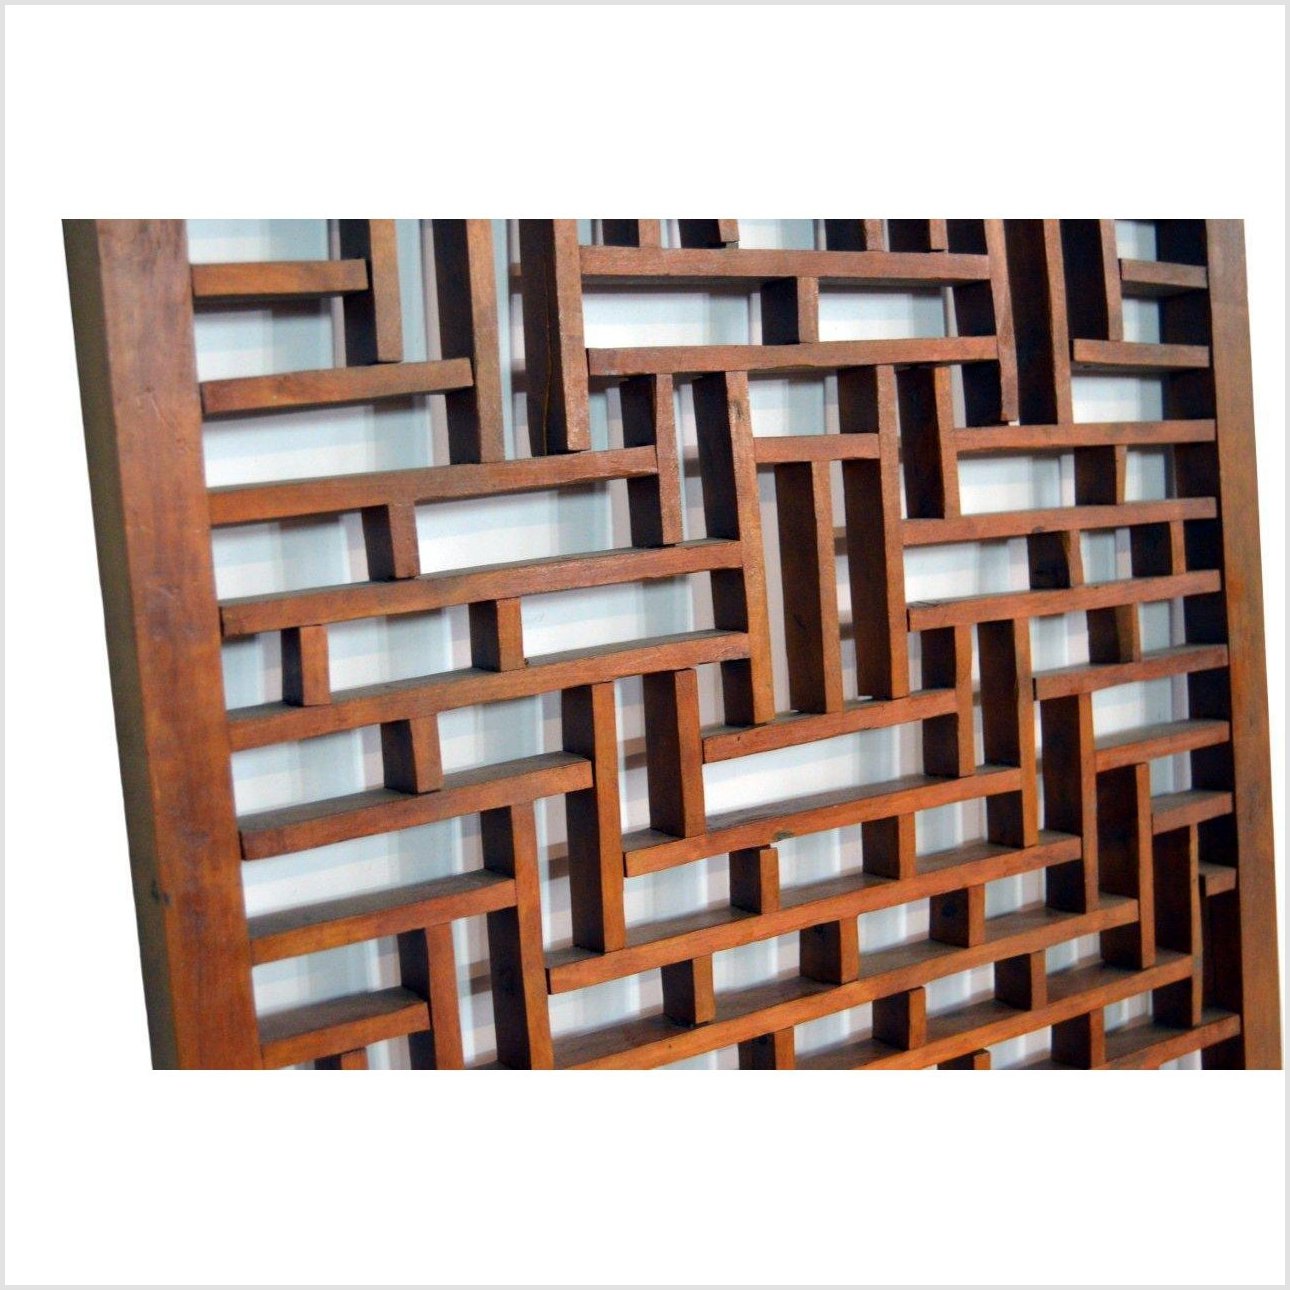 Wooden Wall Panel with Fretwork-YN2929-4. Asian & Chinese Furniture, Art, Antiques, Vintage Home Décor for sale at FEA Home